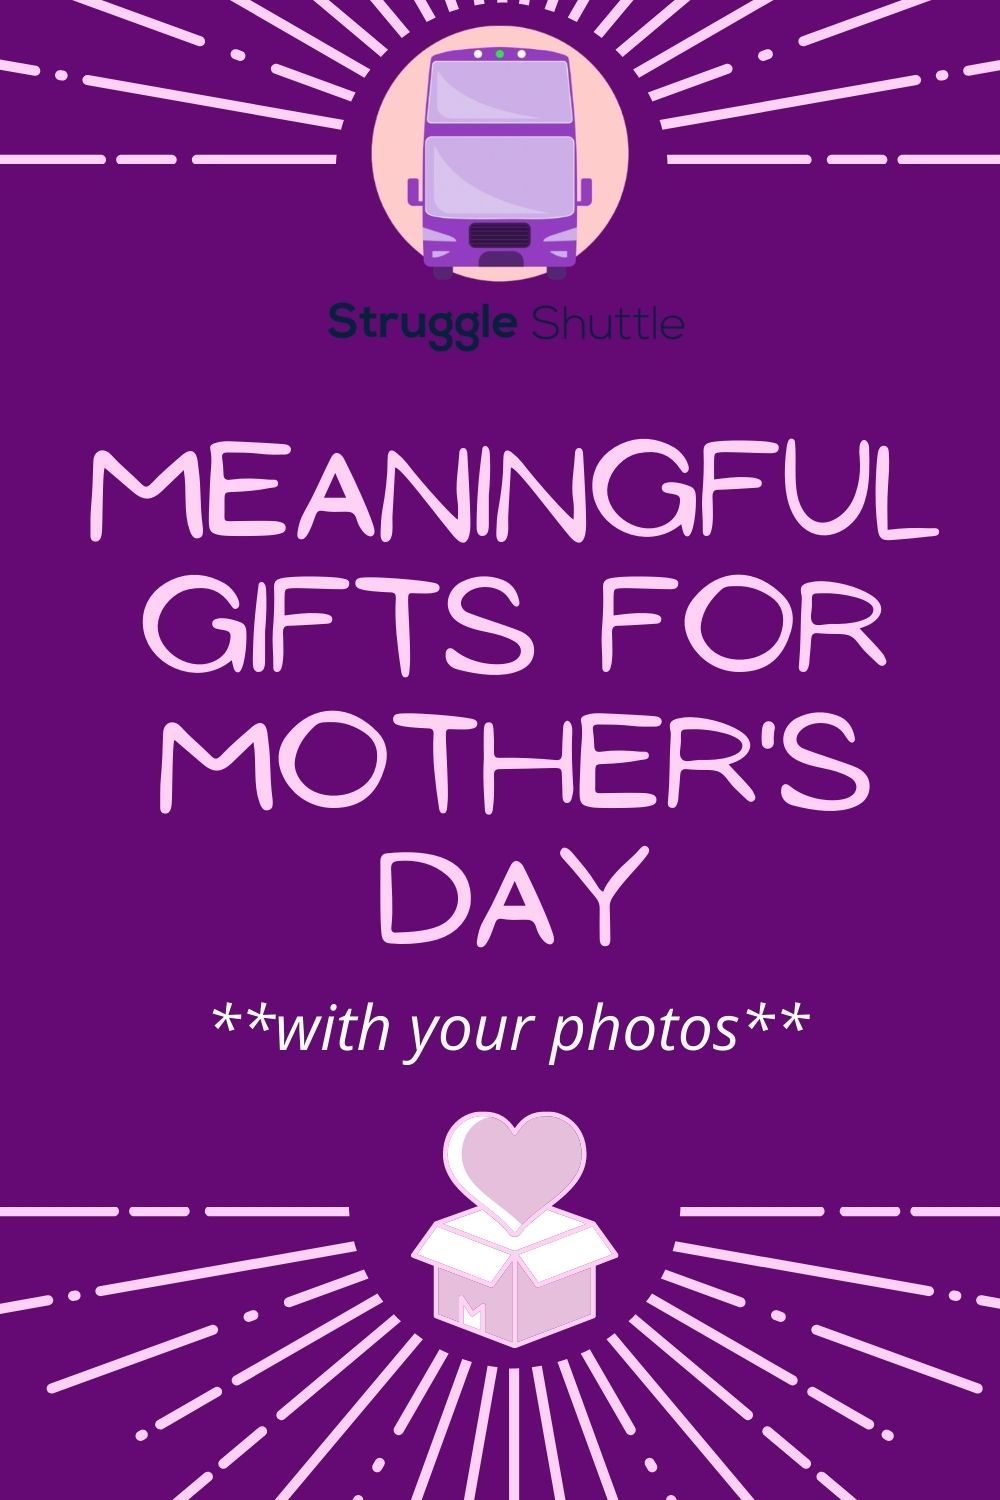 mother's day meaningful gifts